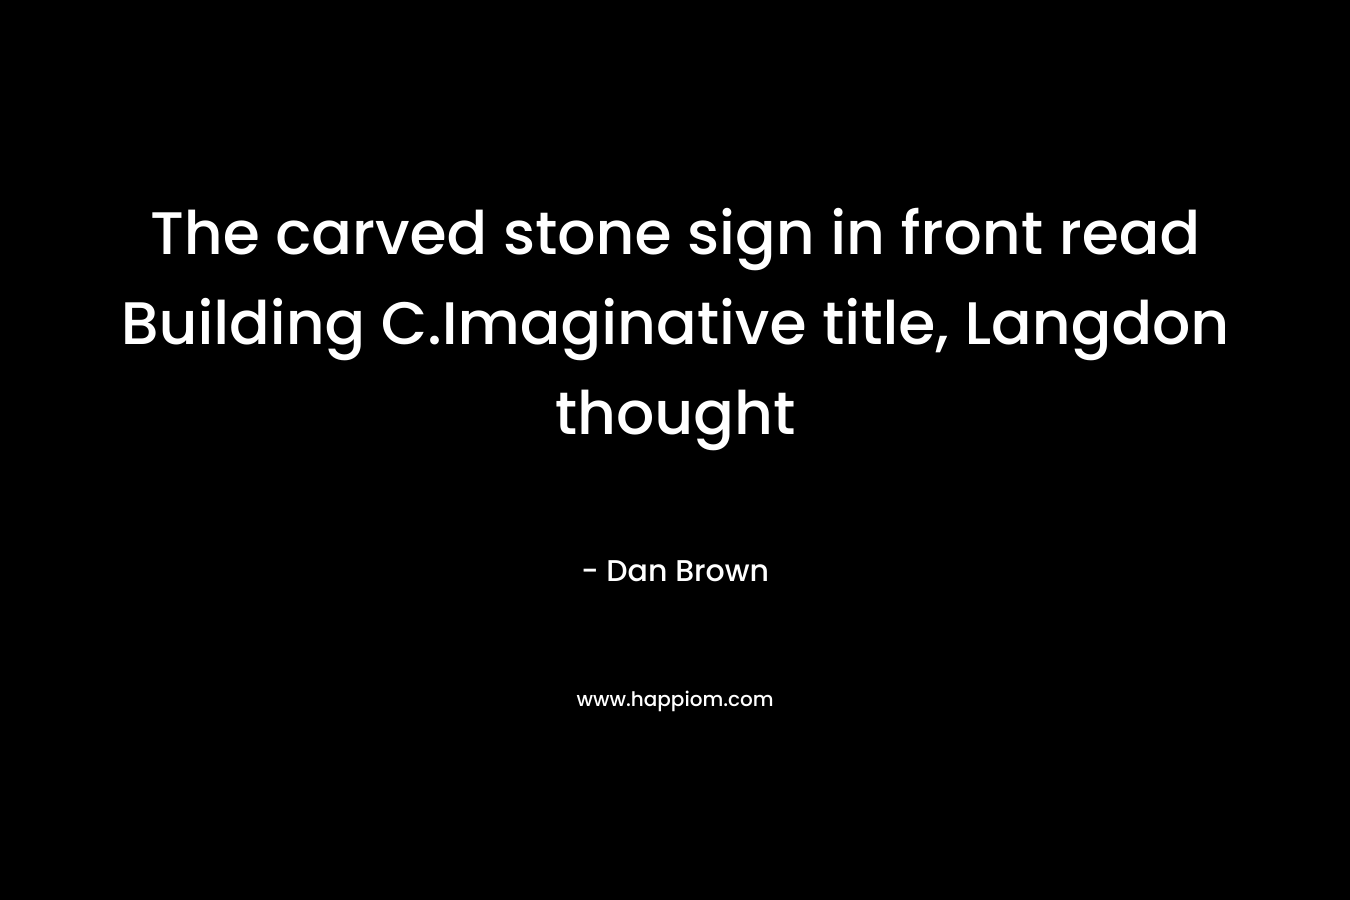 The carved stone sign in front read Building C.Imaginative title, Langdon thought – Dan Brown